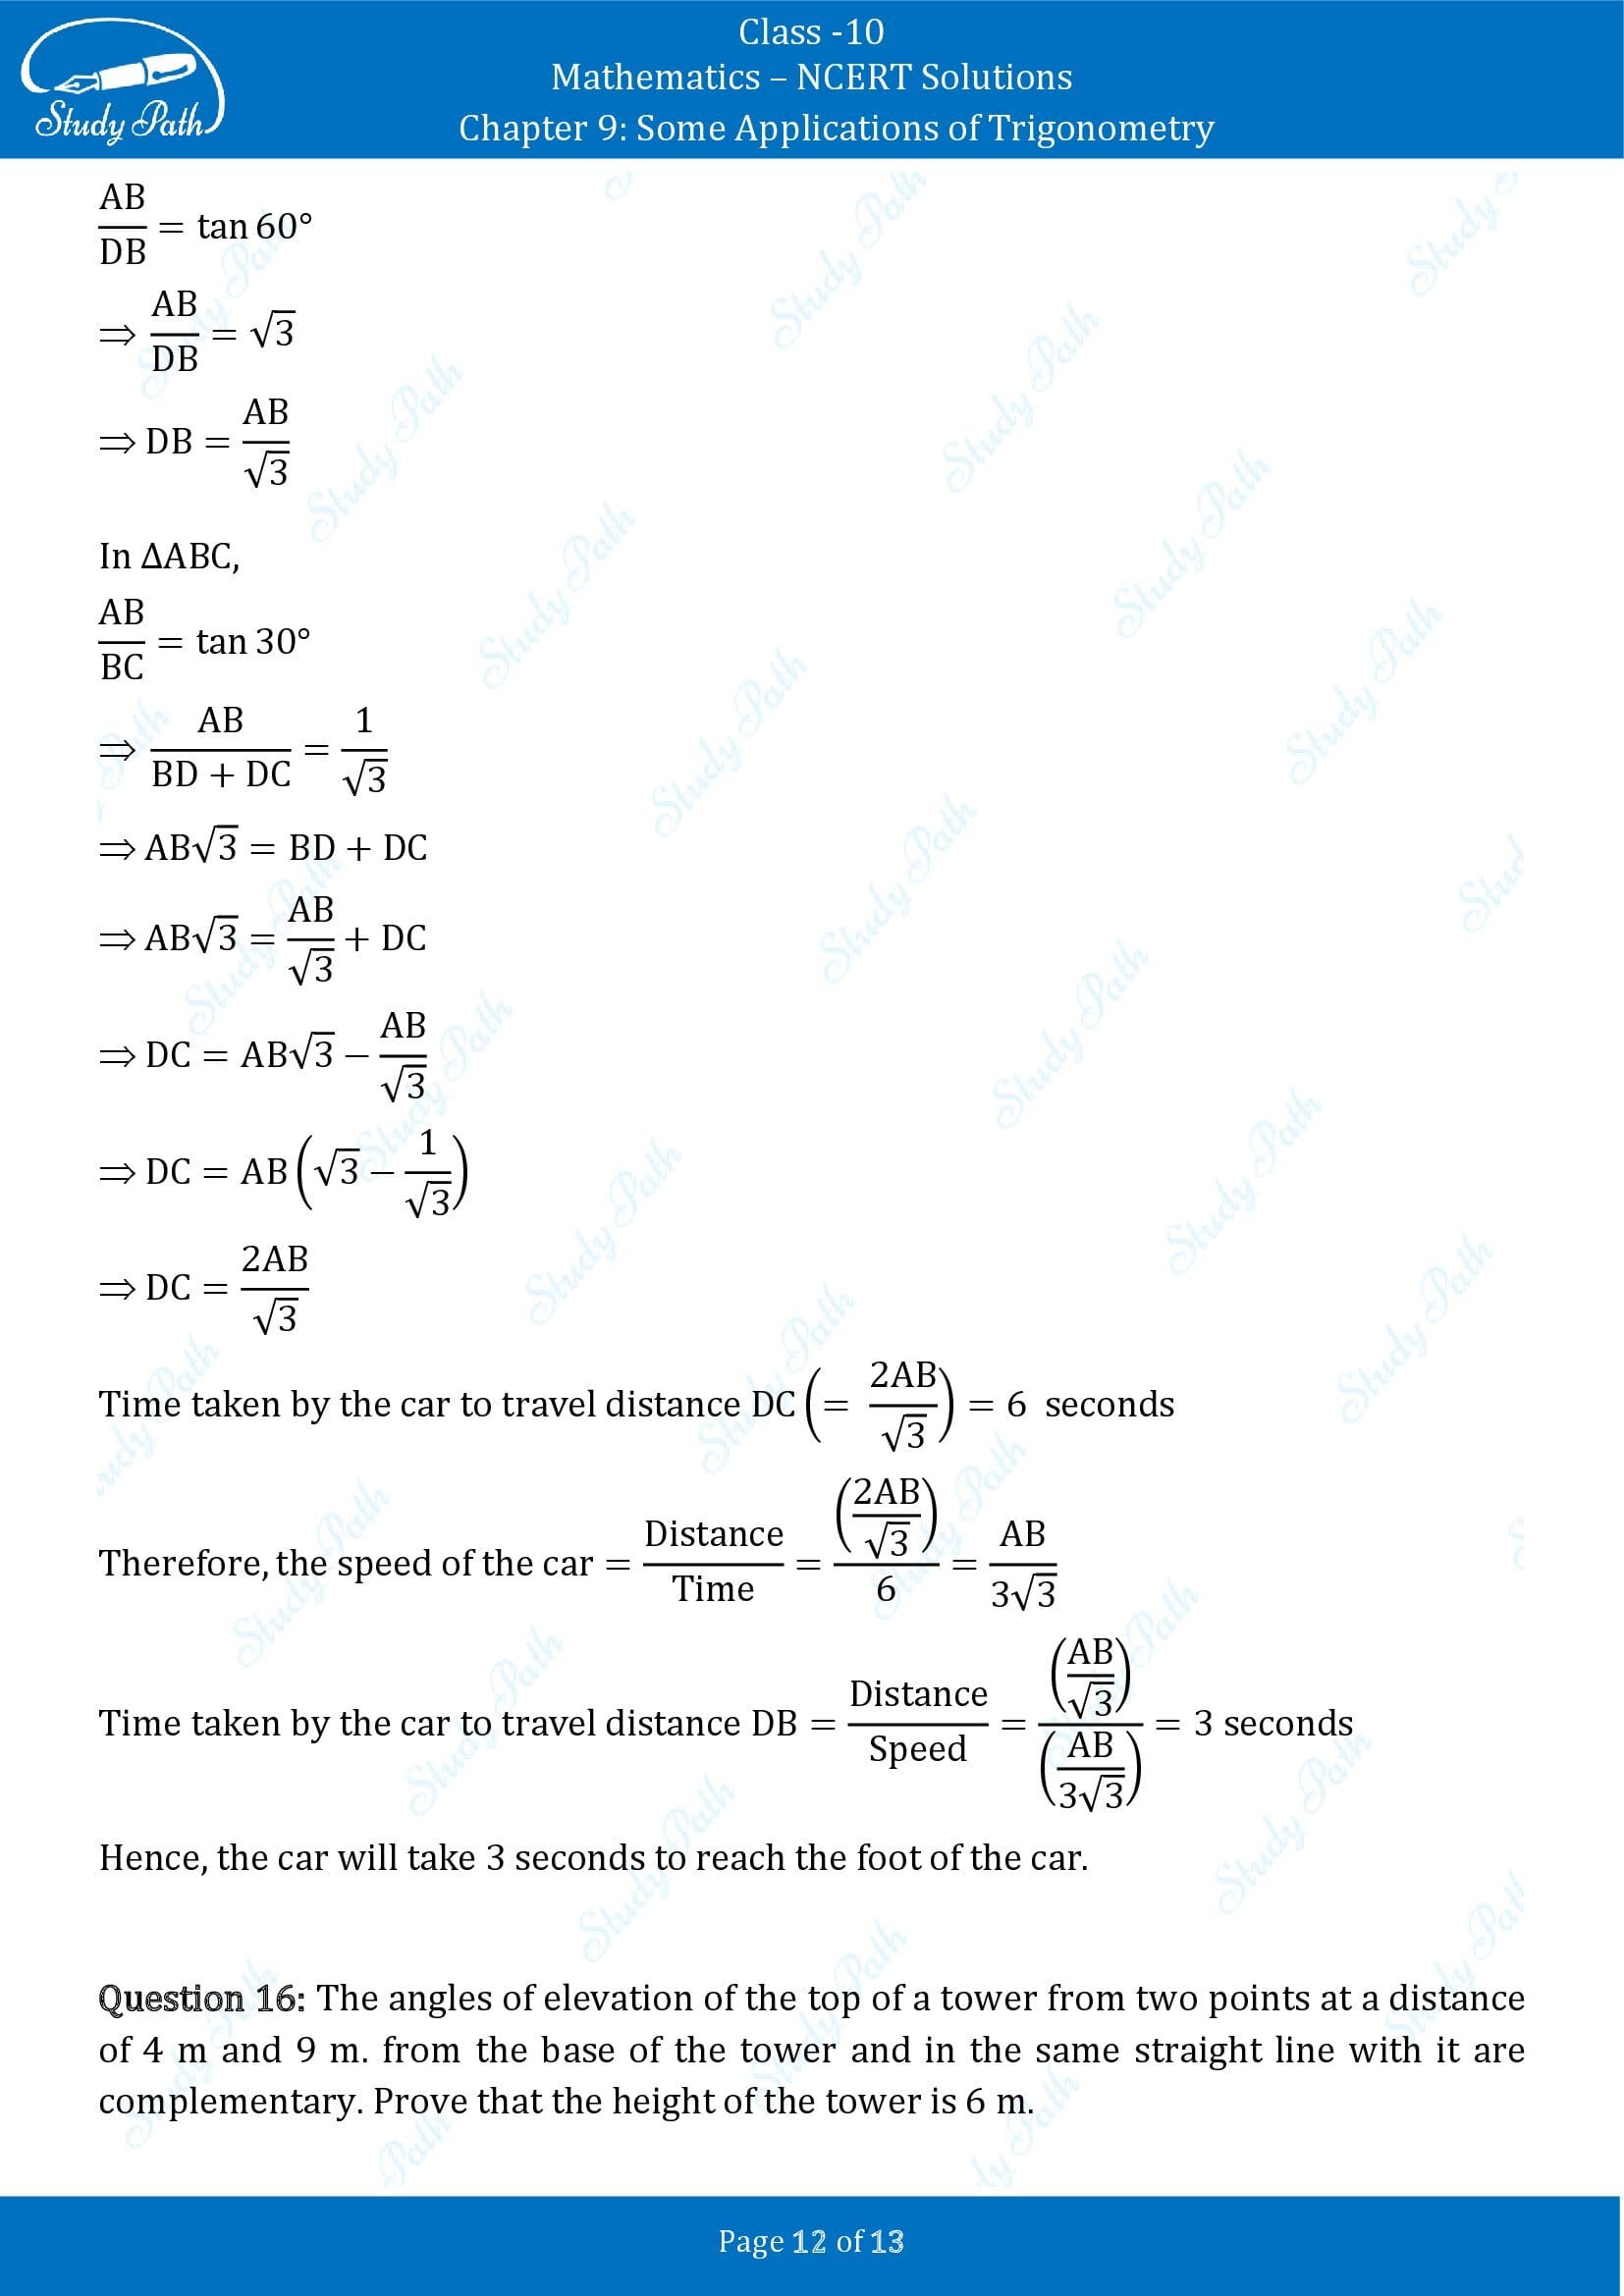 NCERT Solutions for Class 10 Maths Chapter 9 Some Applications of Trigonometry 00012